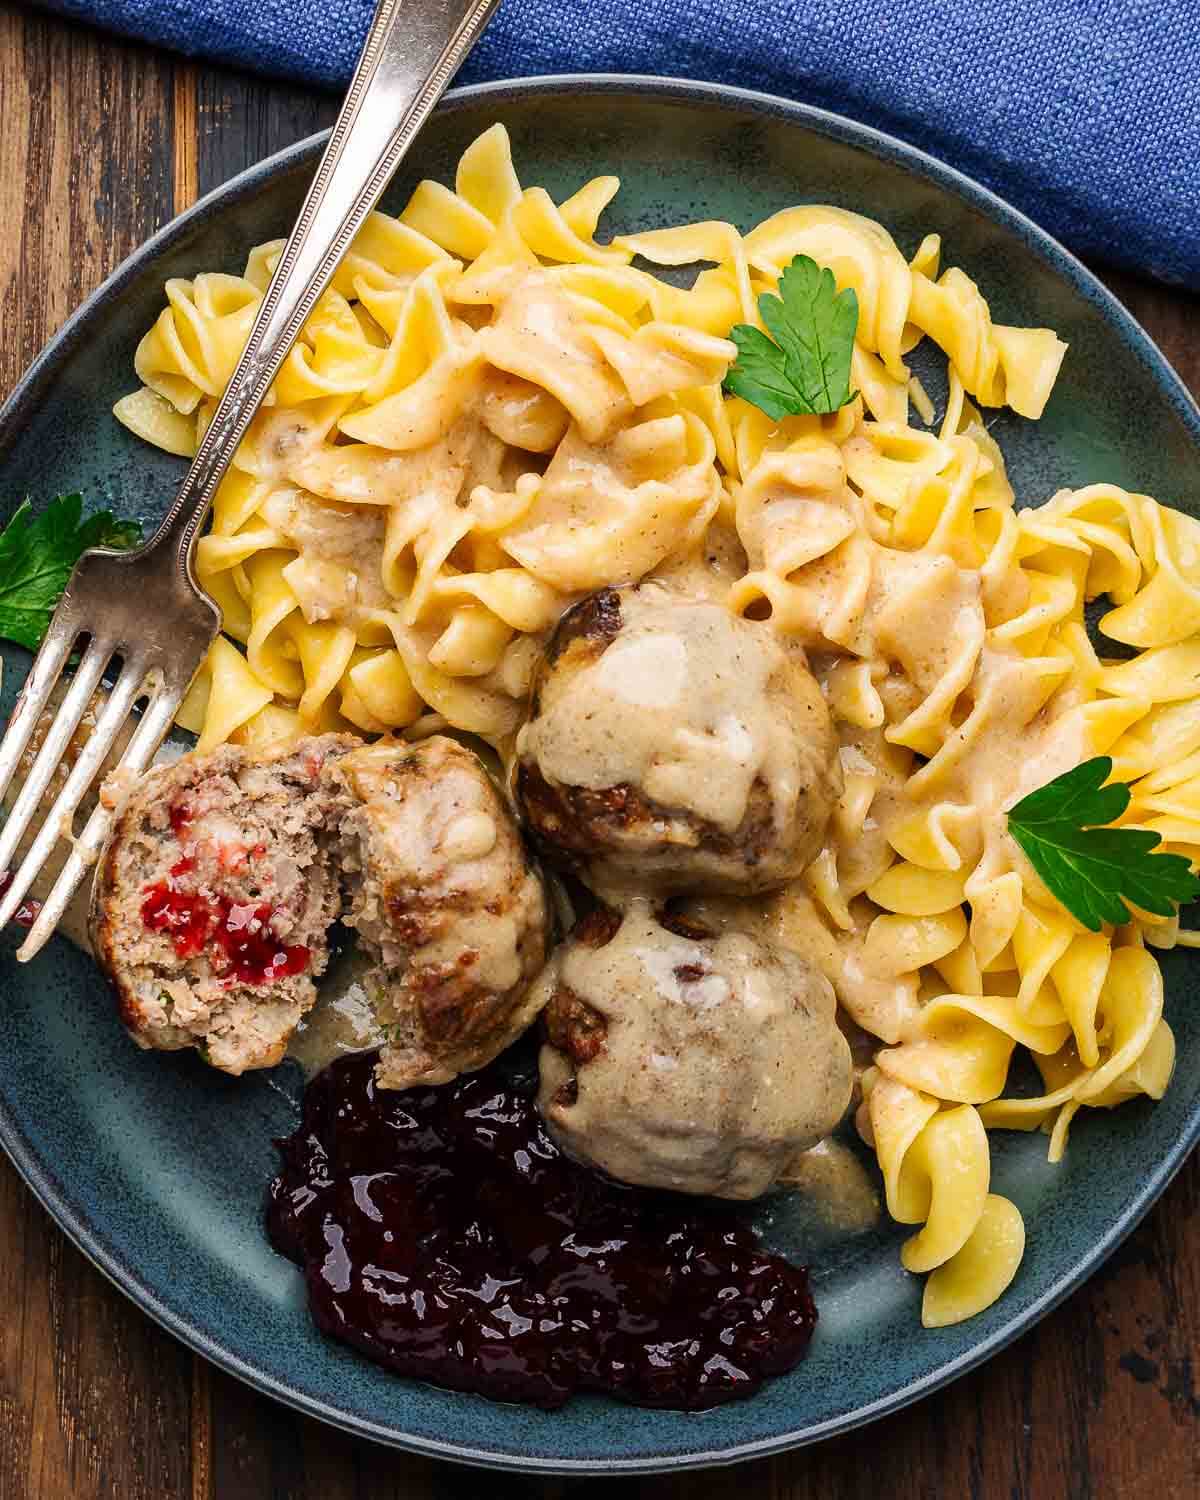 Swedish meatballs in grey plate over egg noodles with lingonberry jam.